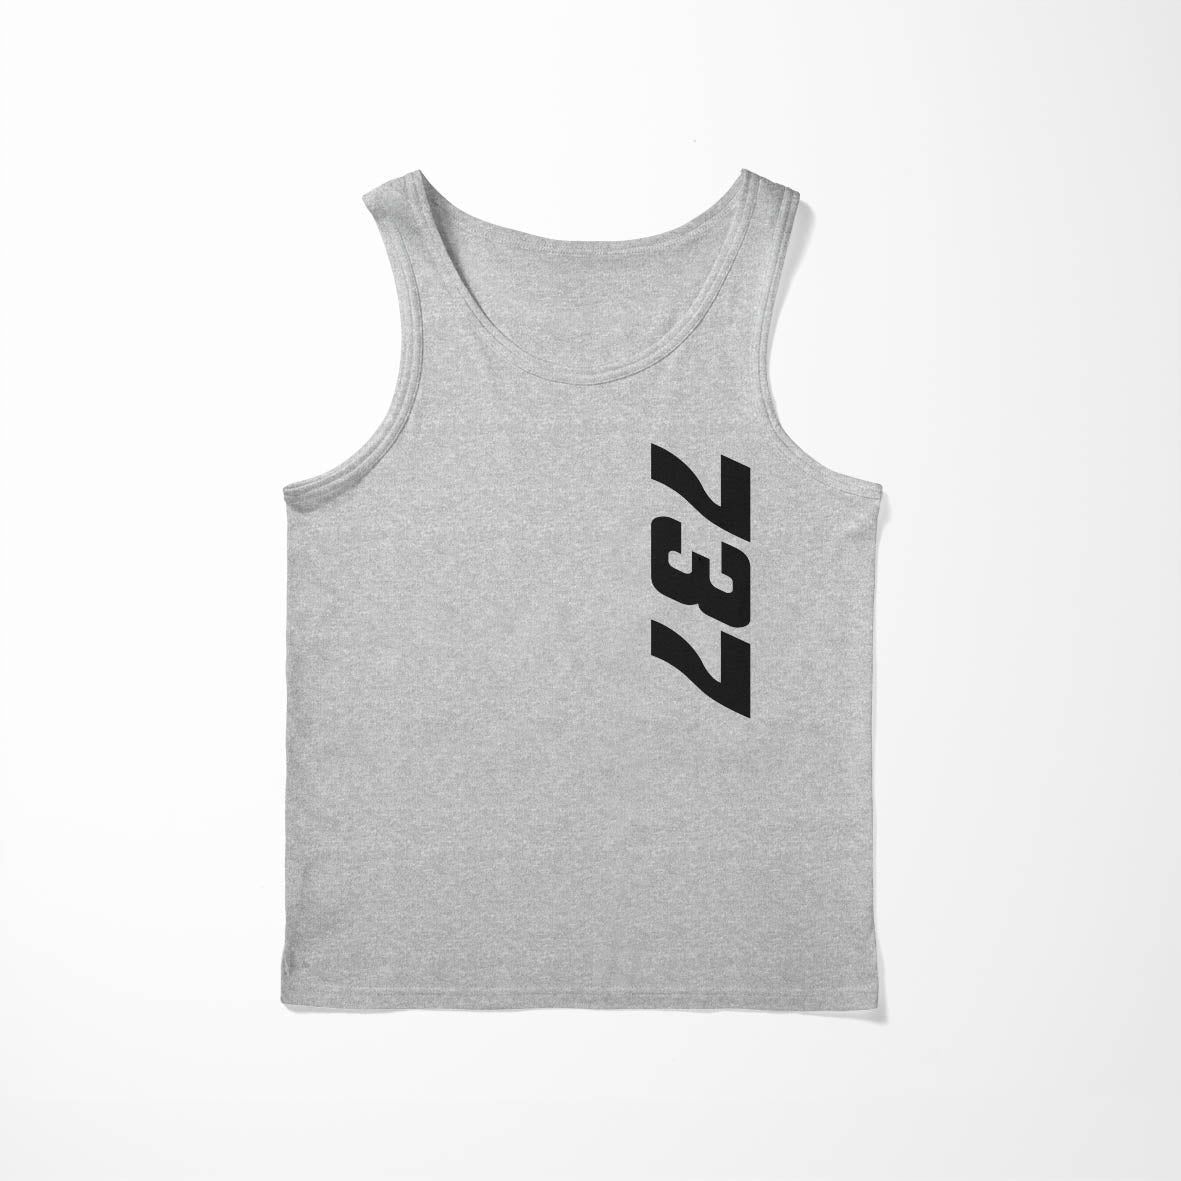 737 Side Text Designed Tank Tops